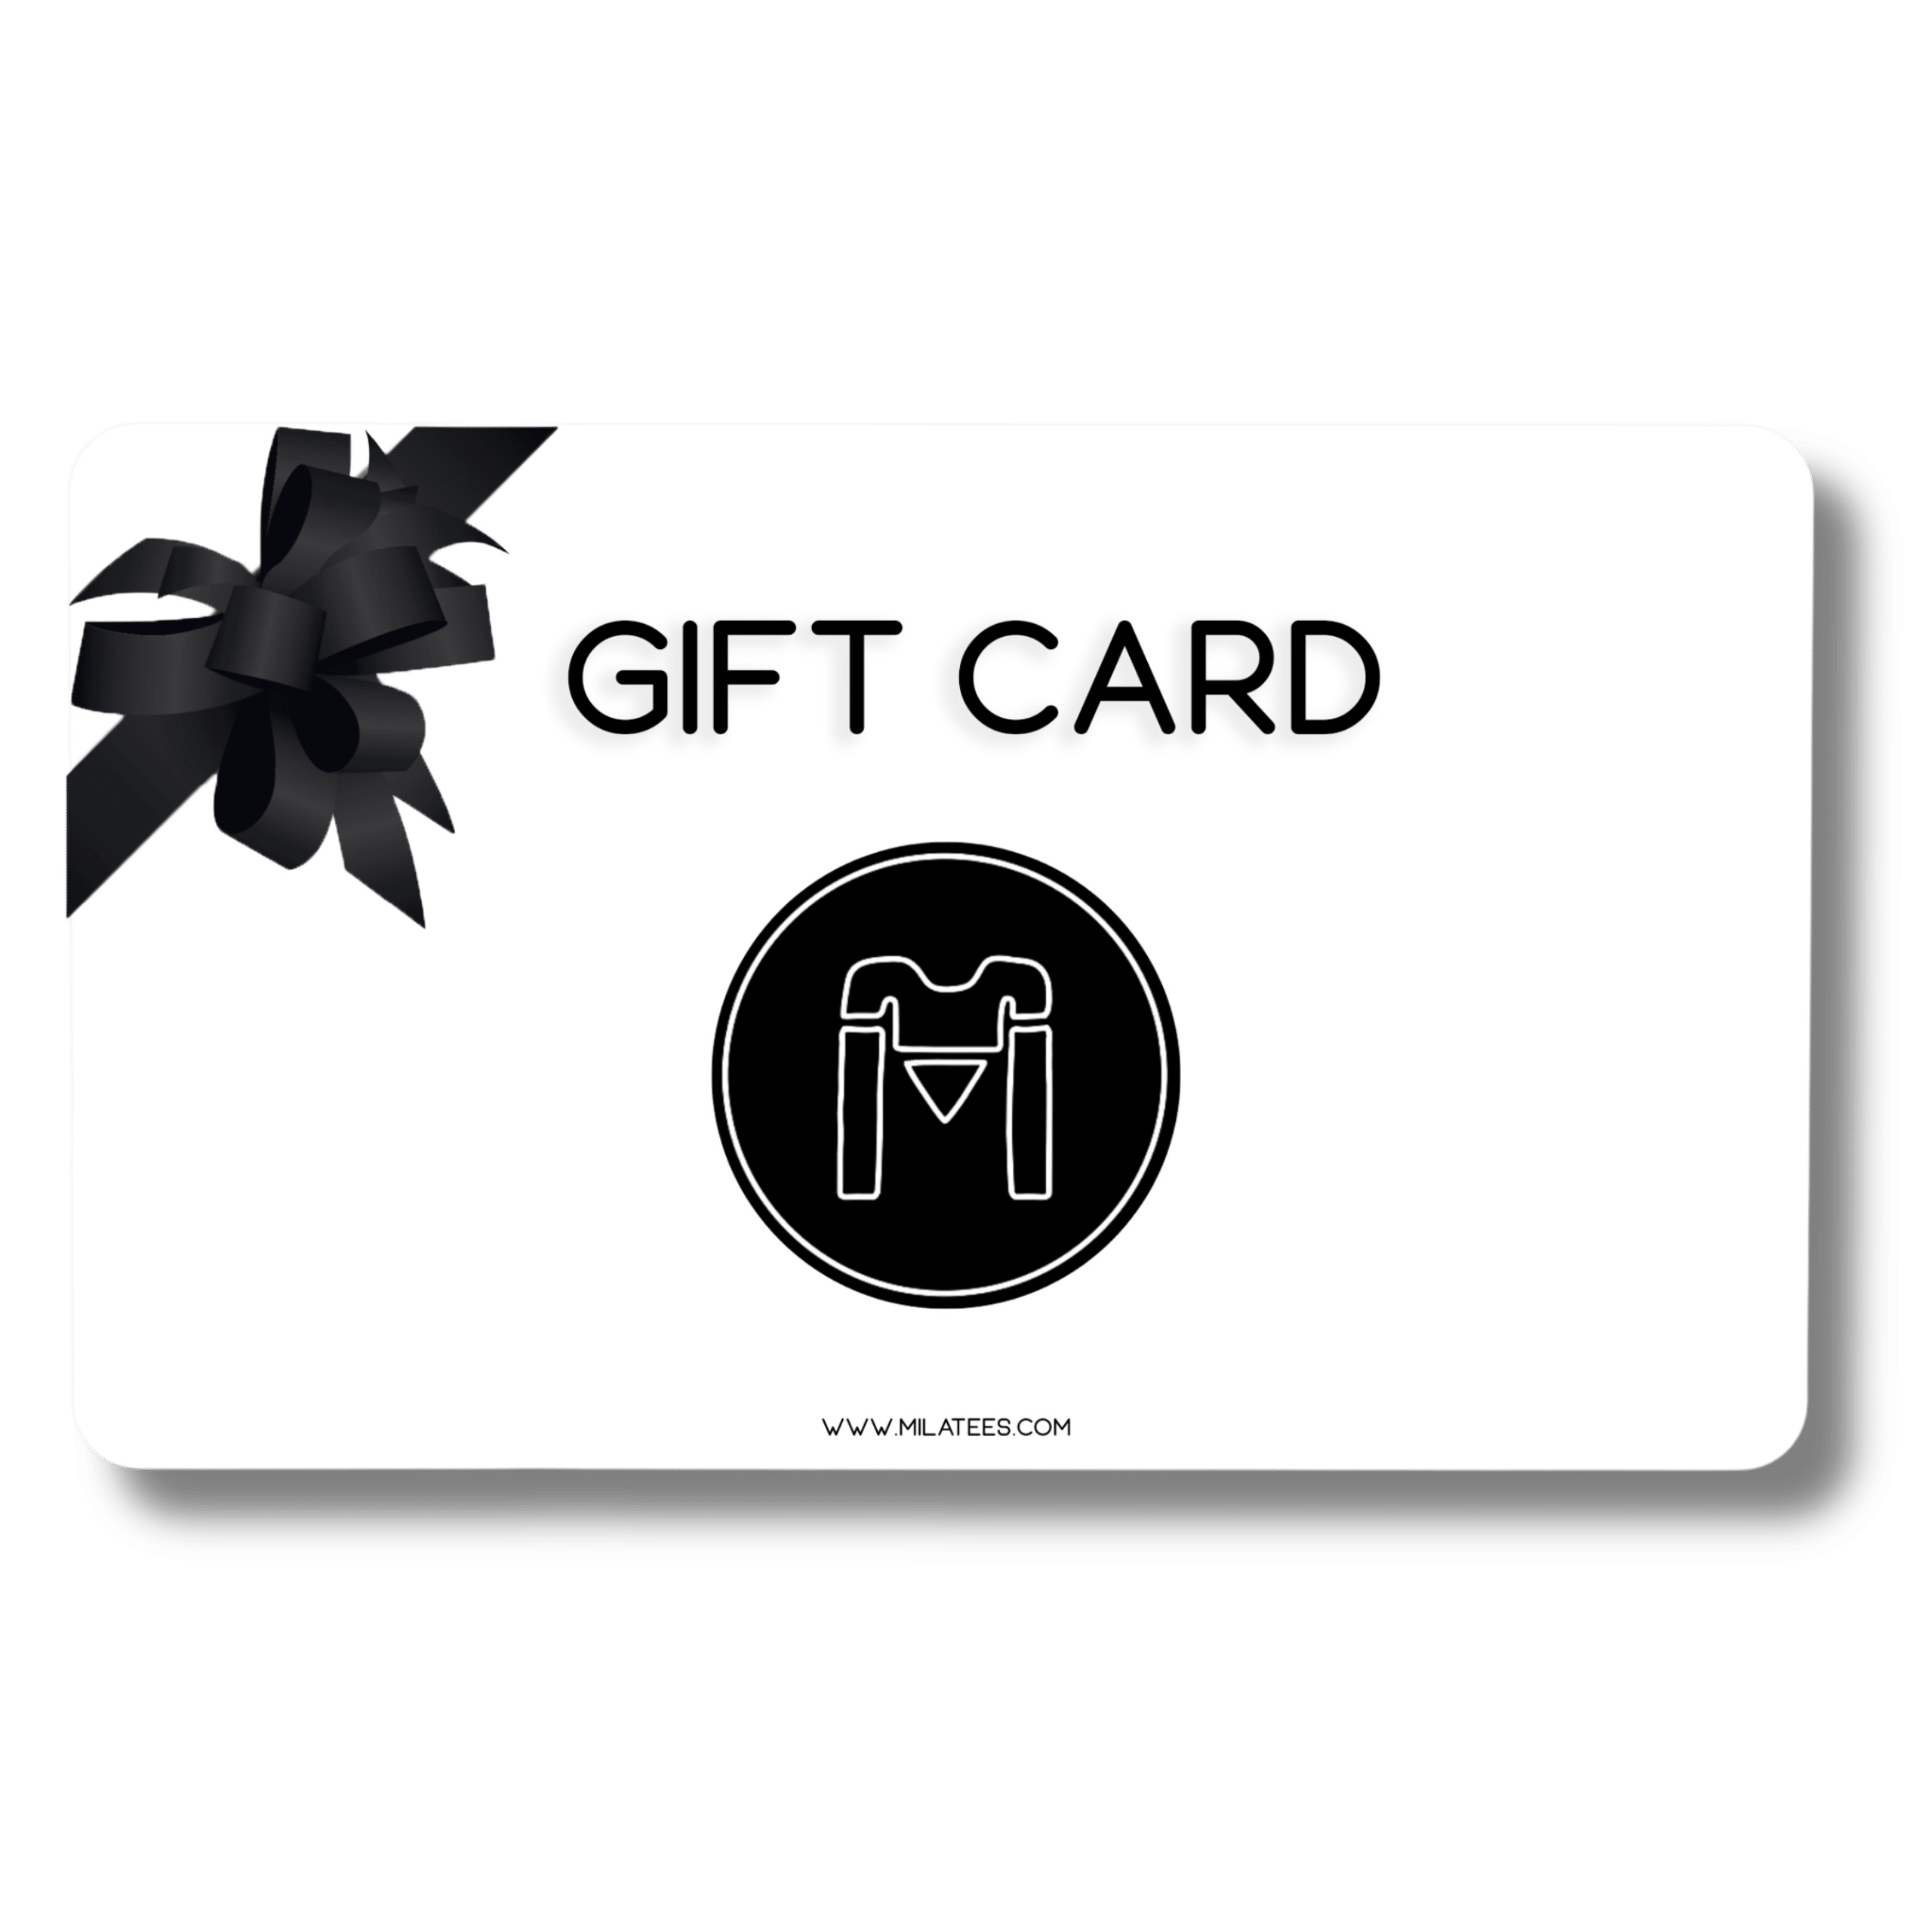 MILATEES GIFT CARD 3